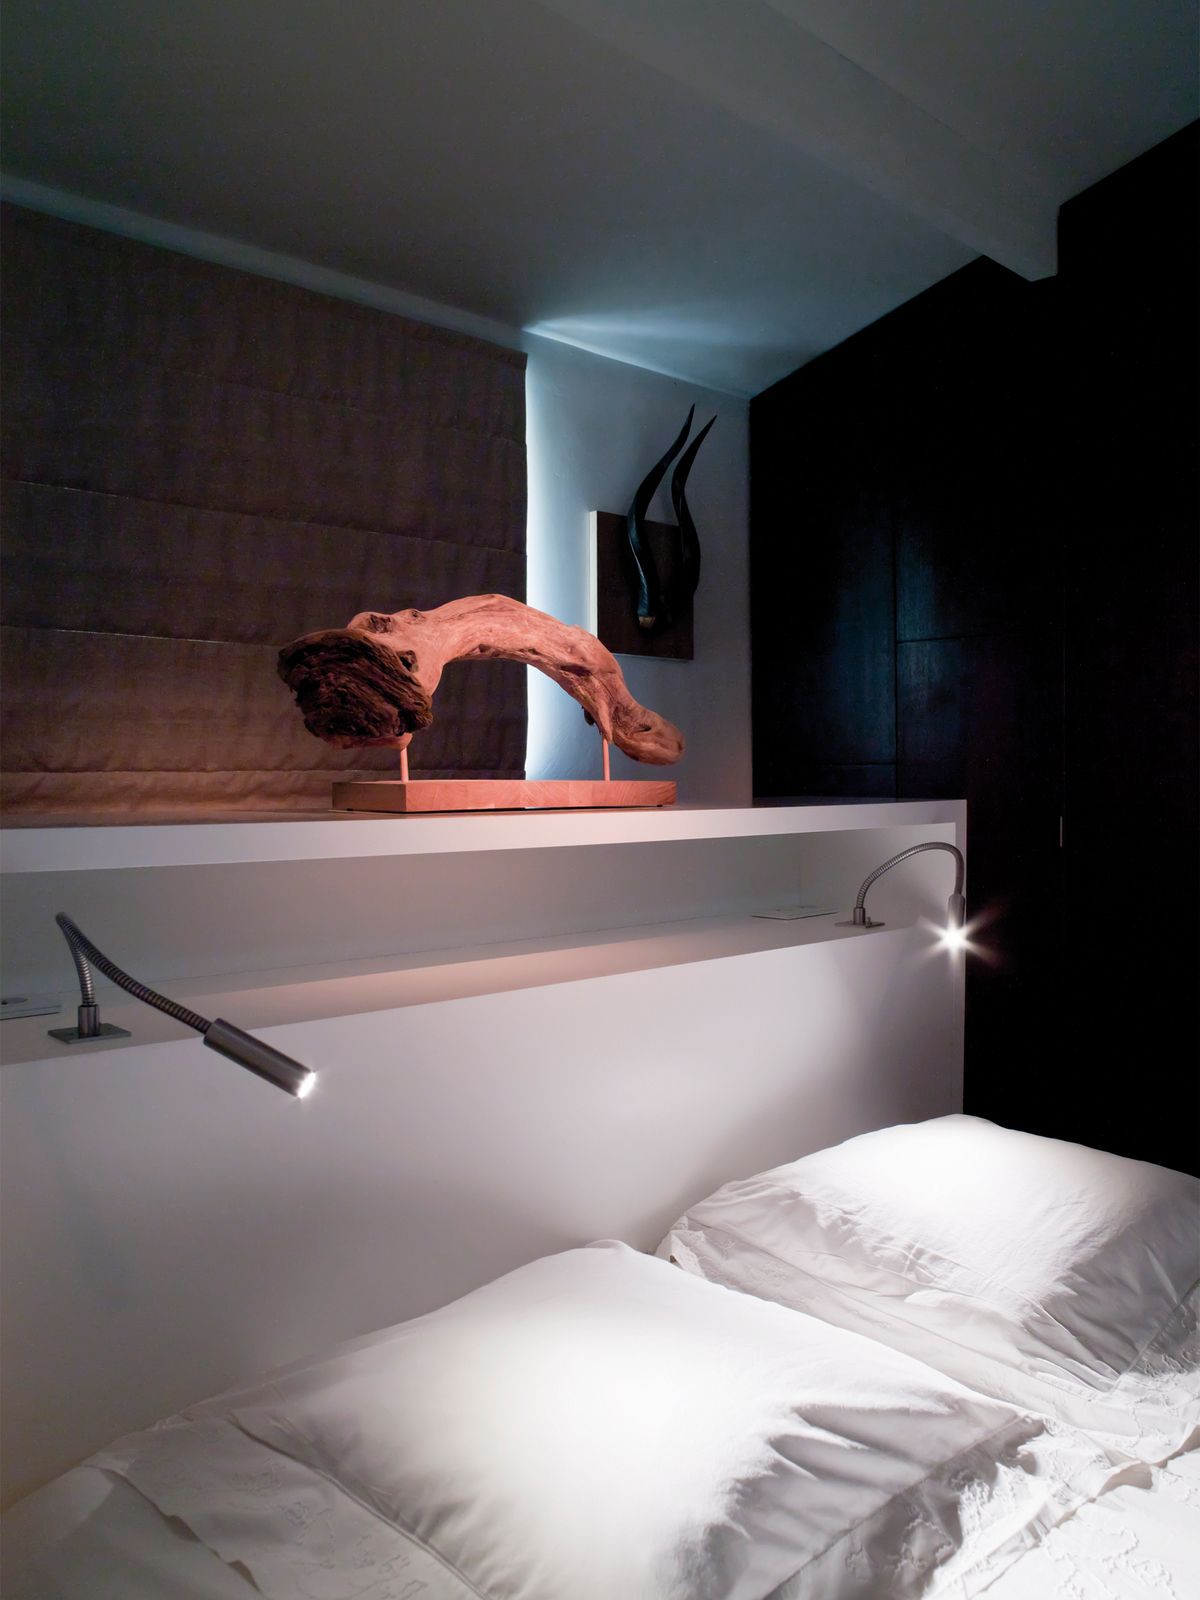 Reading Lights For Bedroom
 Wel e Books Back Into Your Life With Stylish Reading Lights